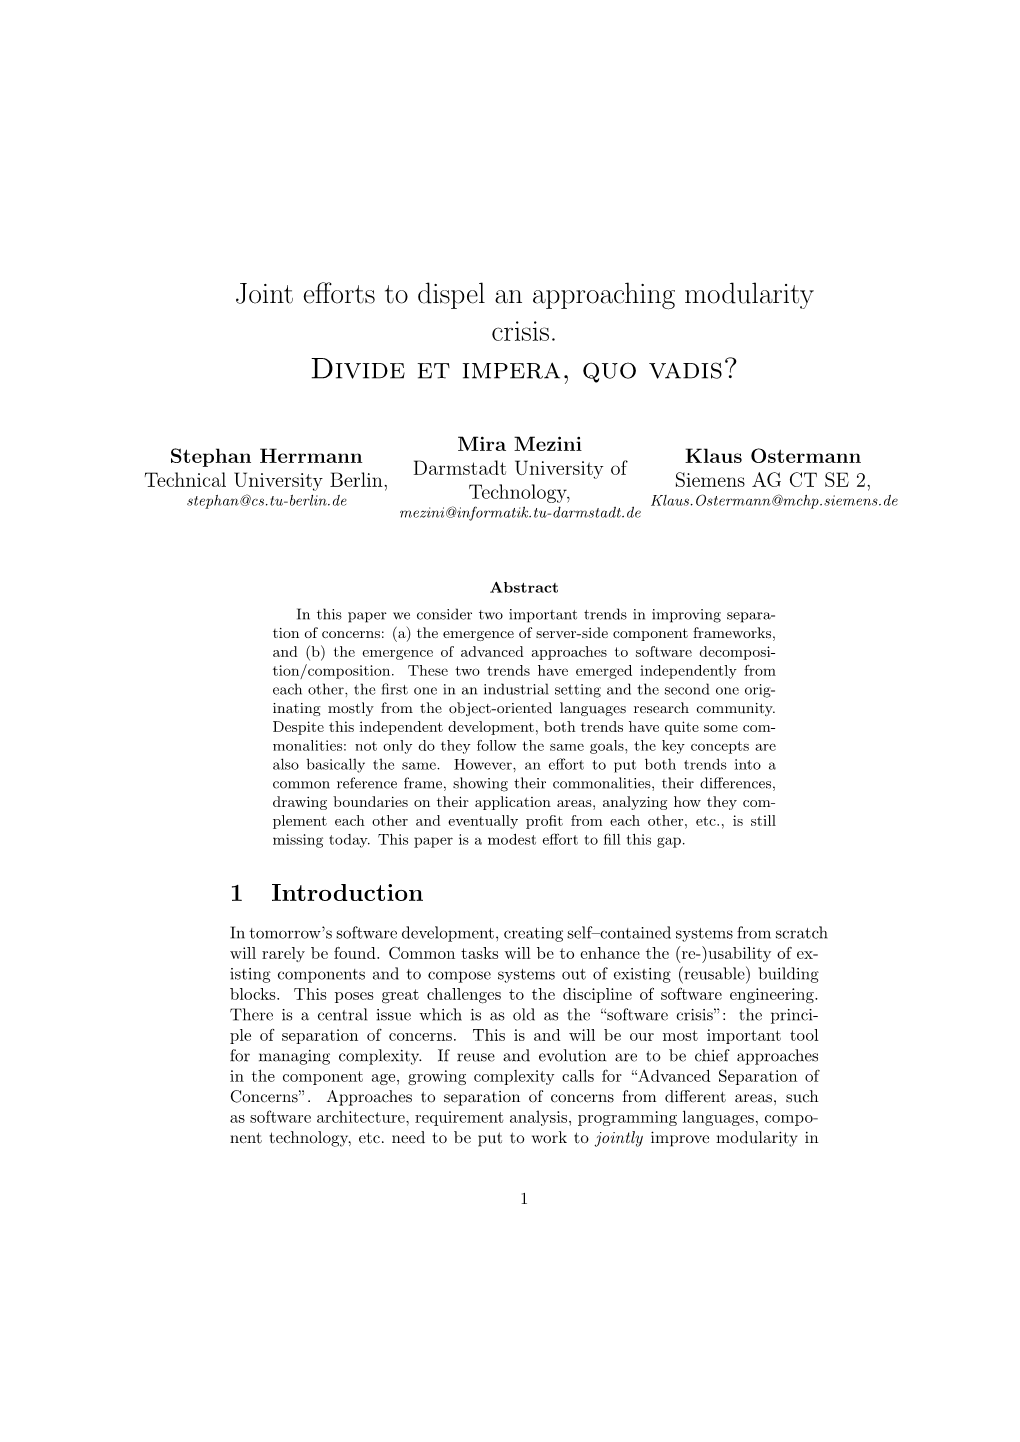 Joint Efforts to Dispel an Approaching Modularity Crisis. Divide Et Impera